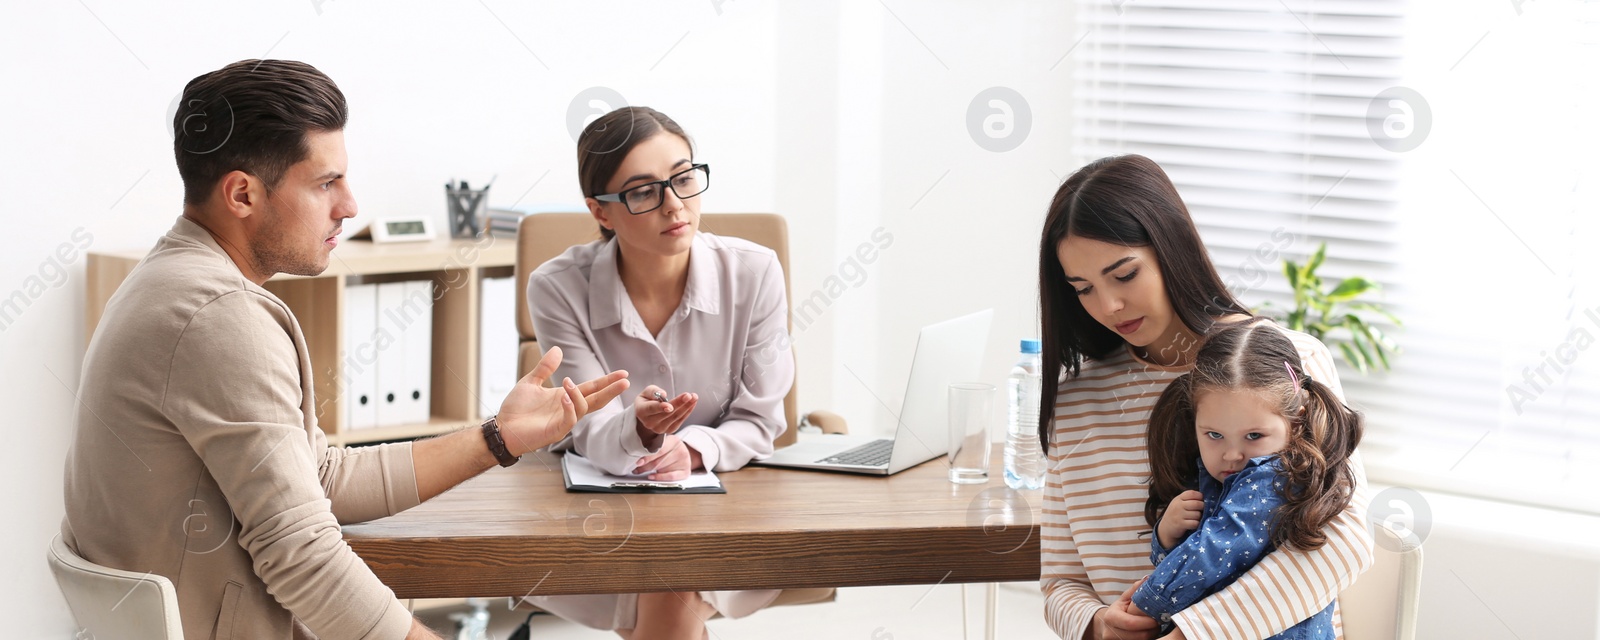 Image of Professional psychologist working with family in office